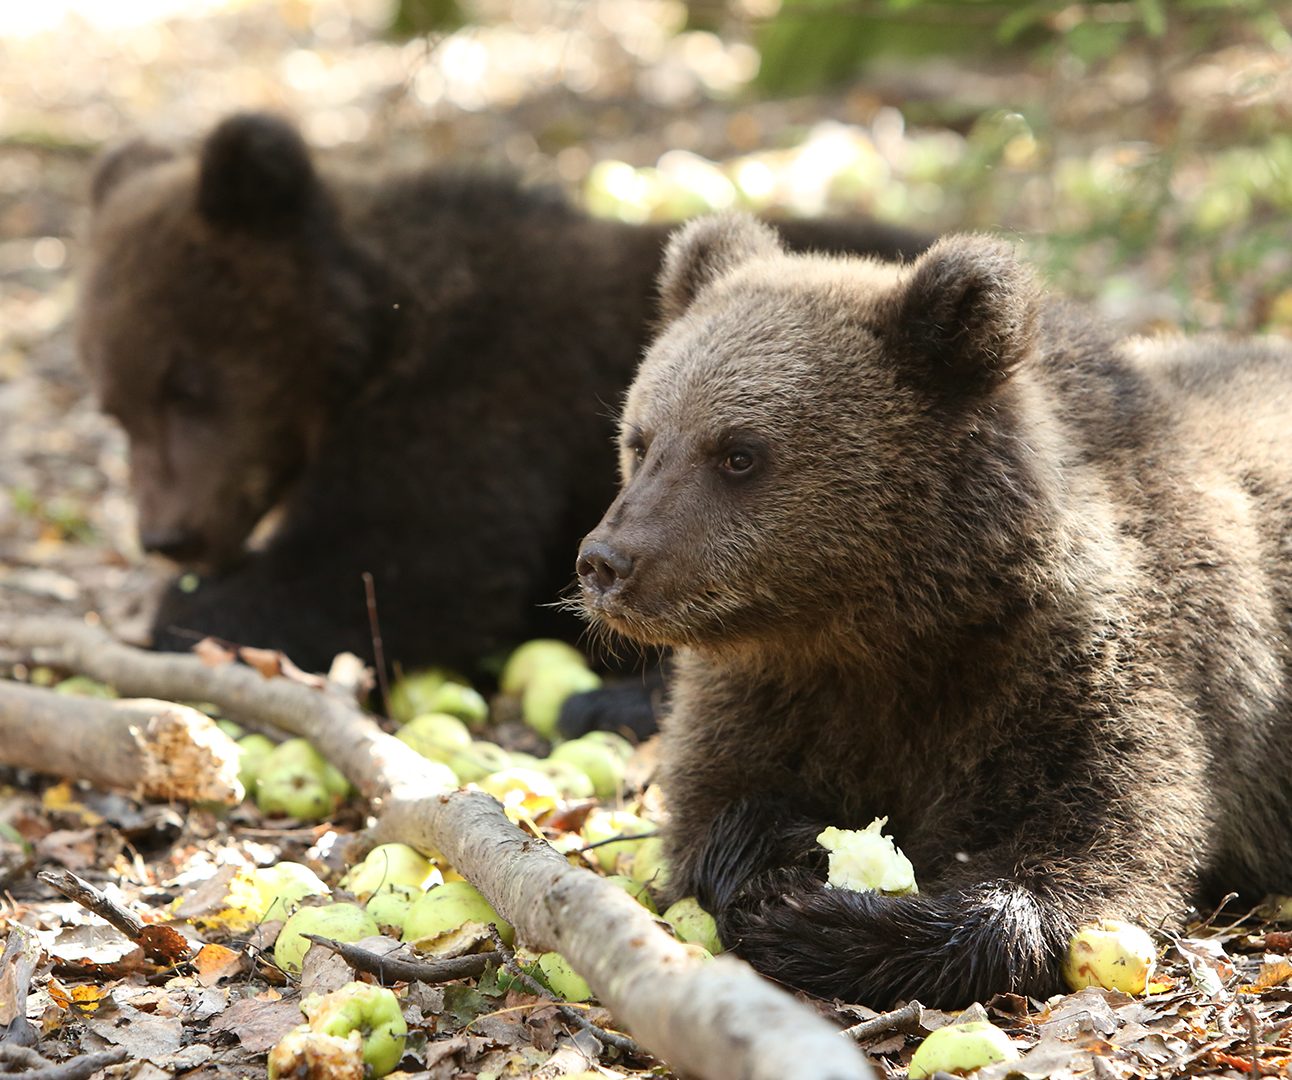 A photo of two brown bear cubs foraging in the forest and eating apples